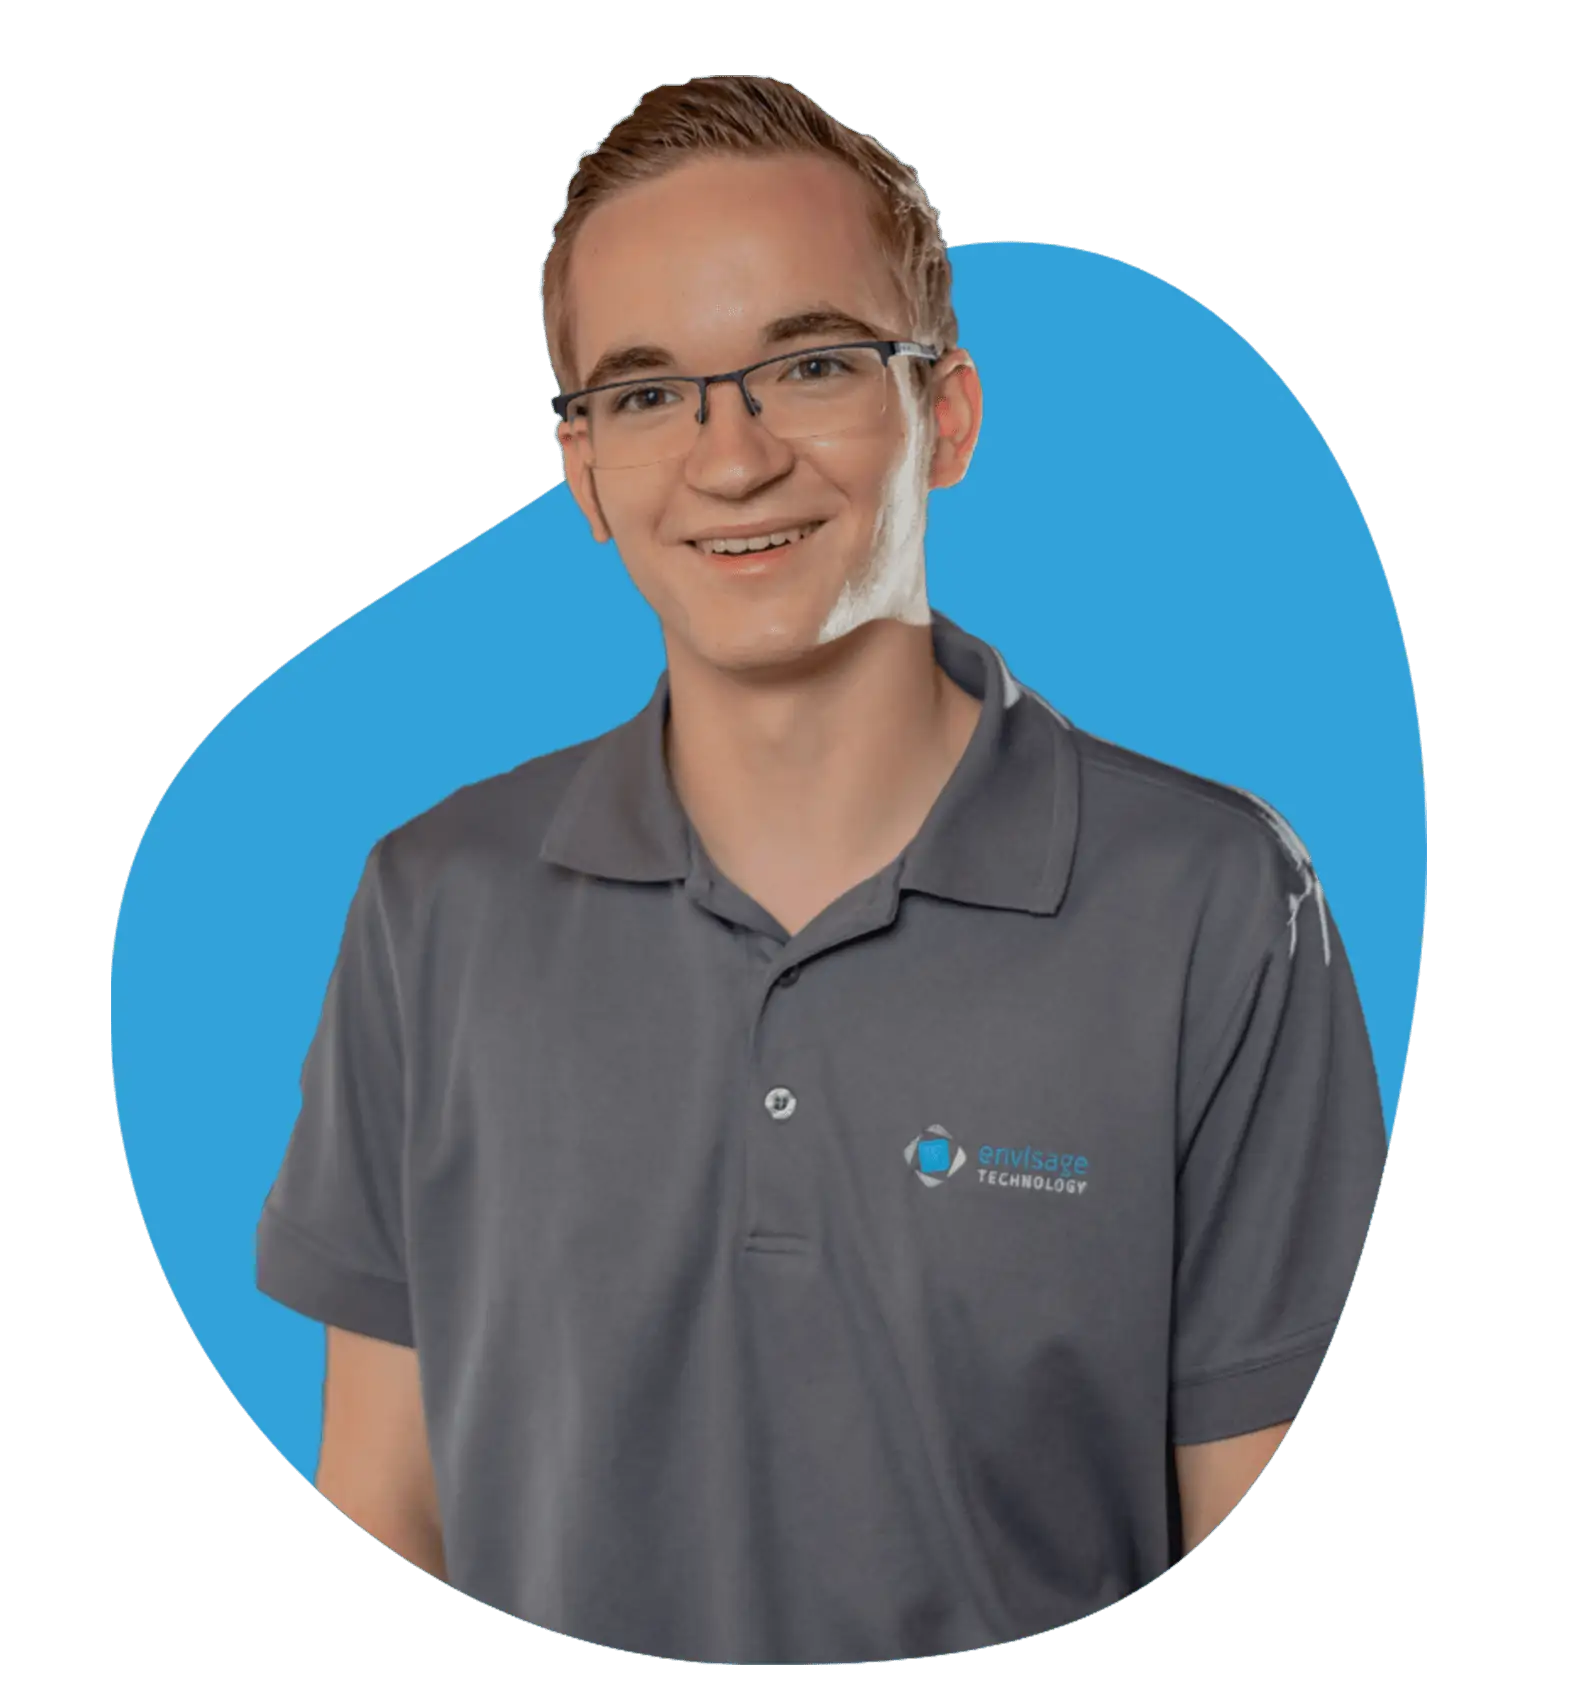 Lachlan Benson, a member of the Envisage Technology team.